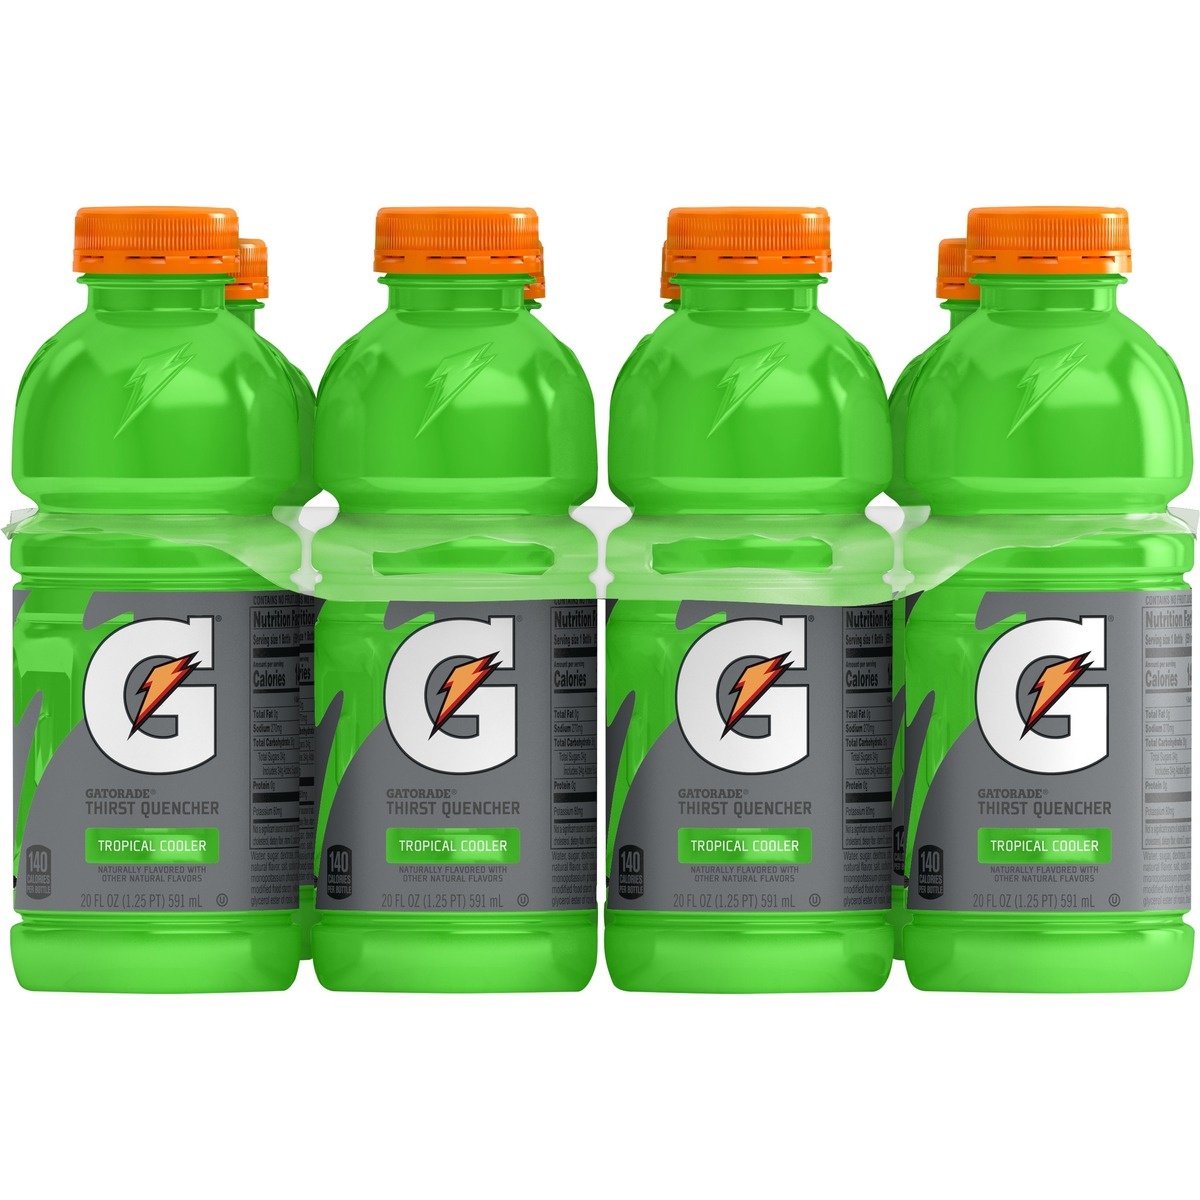 slide 1 of 1, Gatorade Thirst Quencher Tropical Cooler Sports Drink, 8 ct; 20 oz